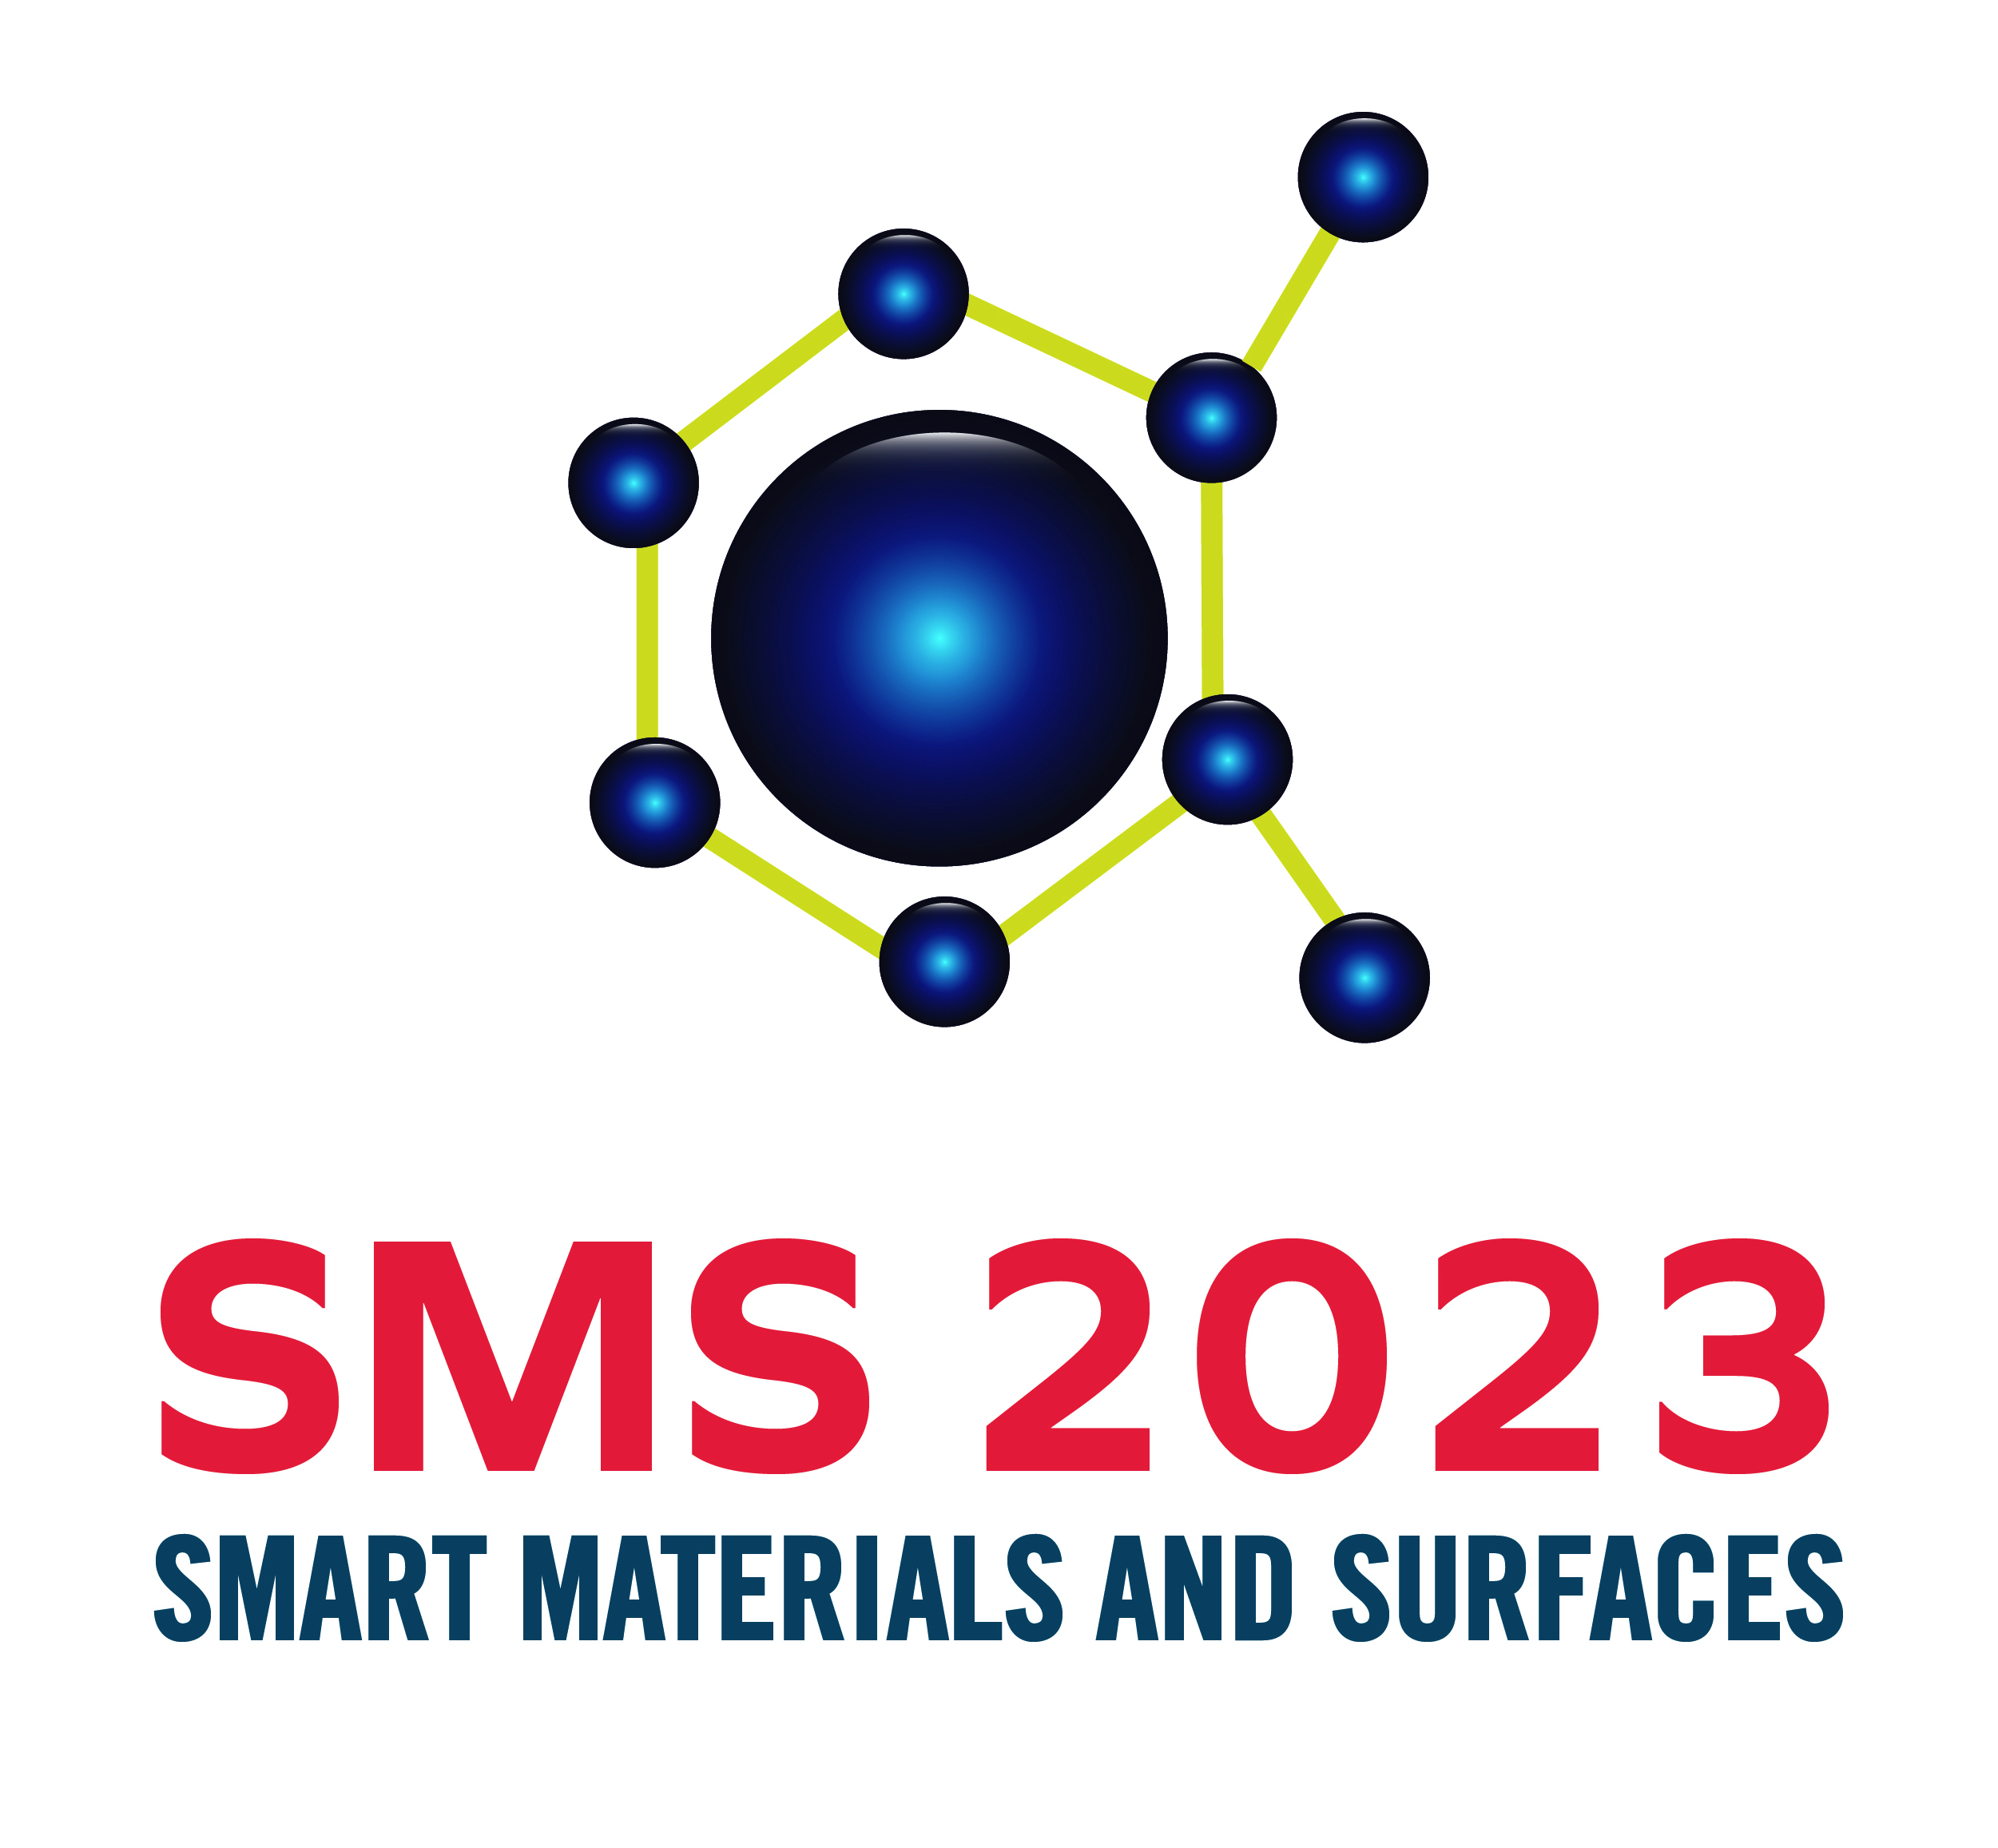 The 8th Ed. of the Smart Materials and Surfaces - SMS 2023 Conference